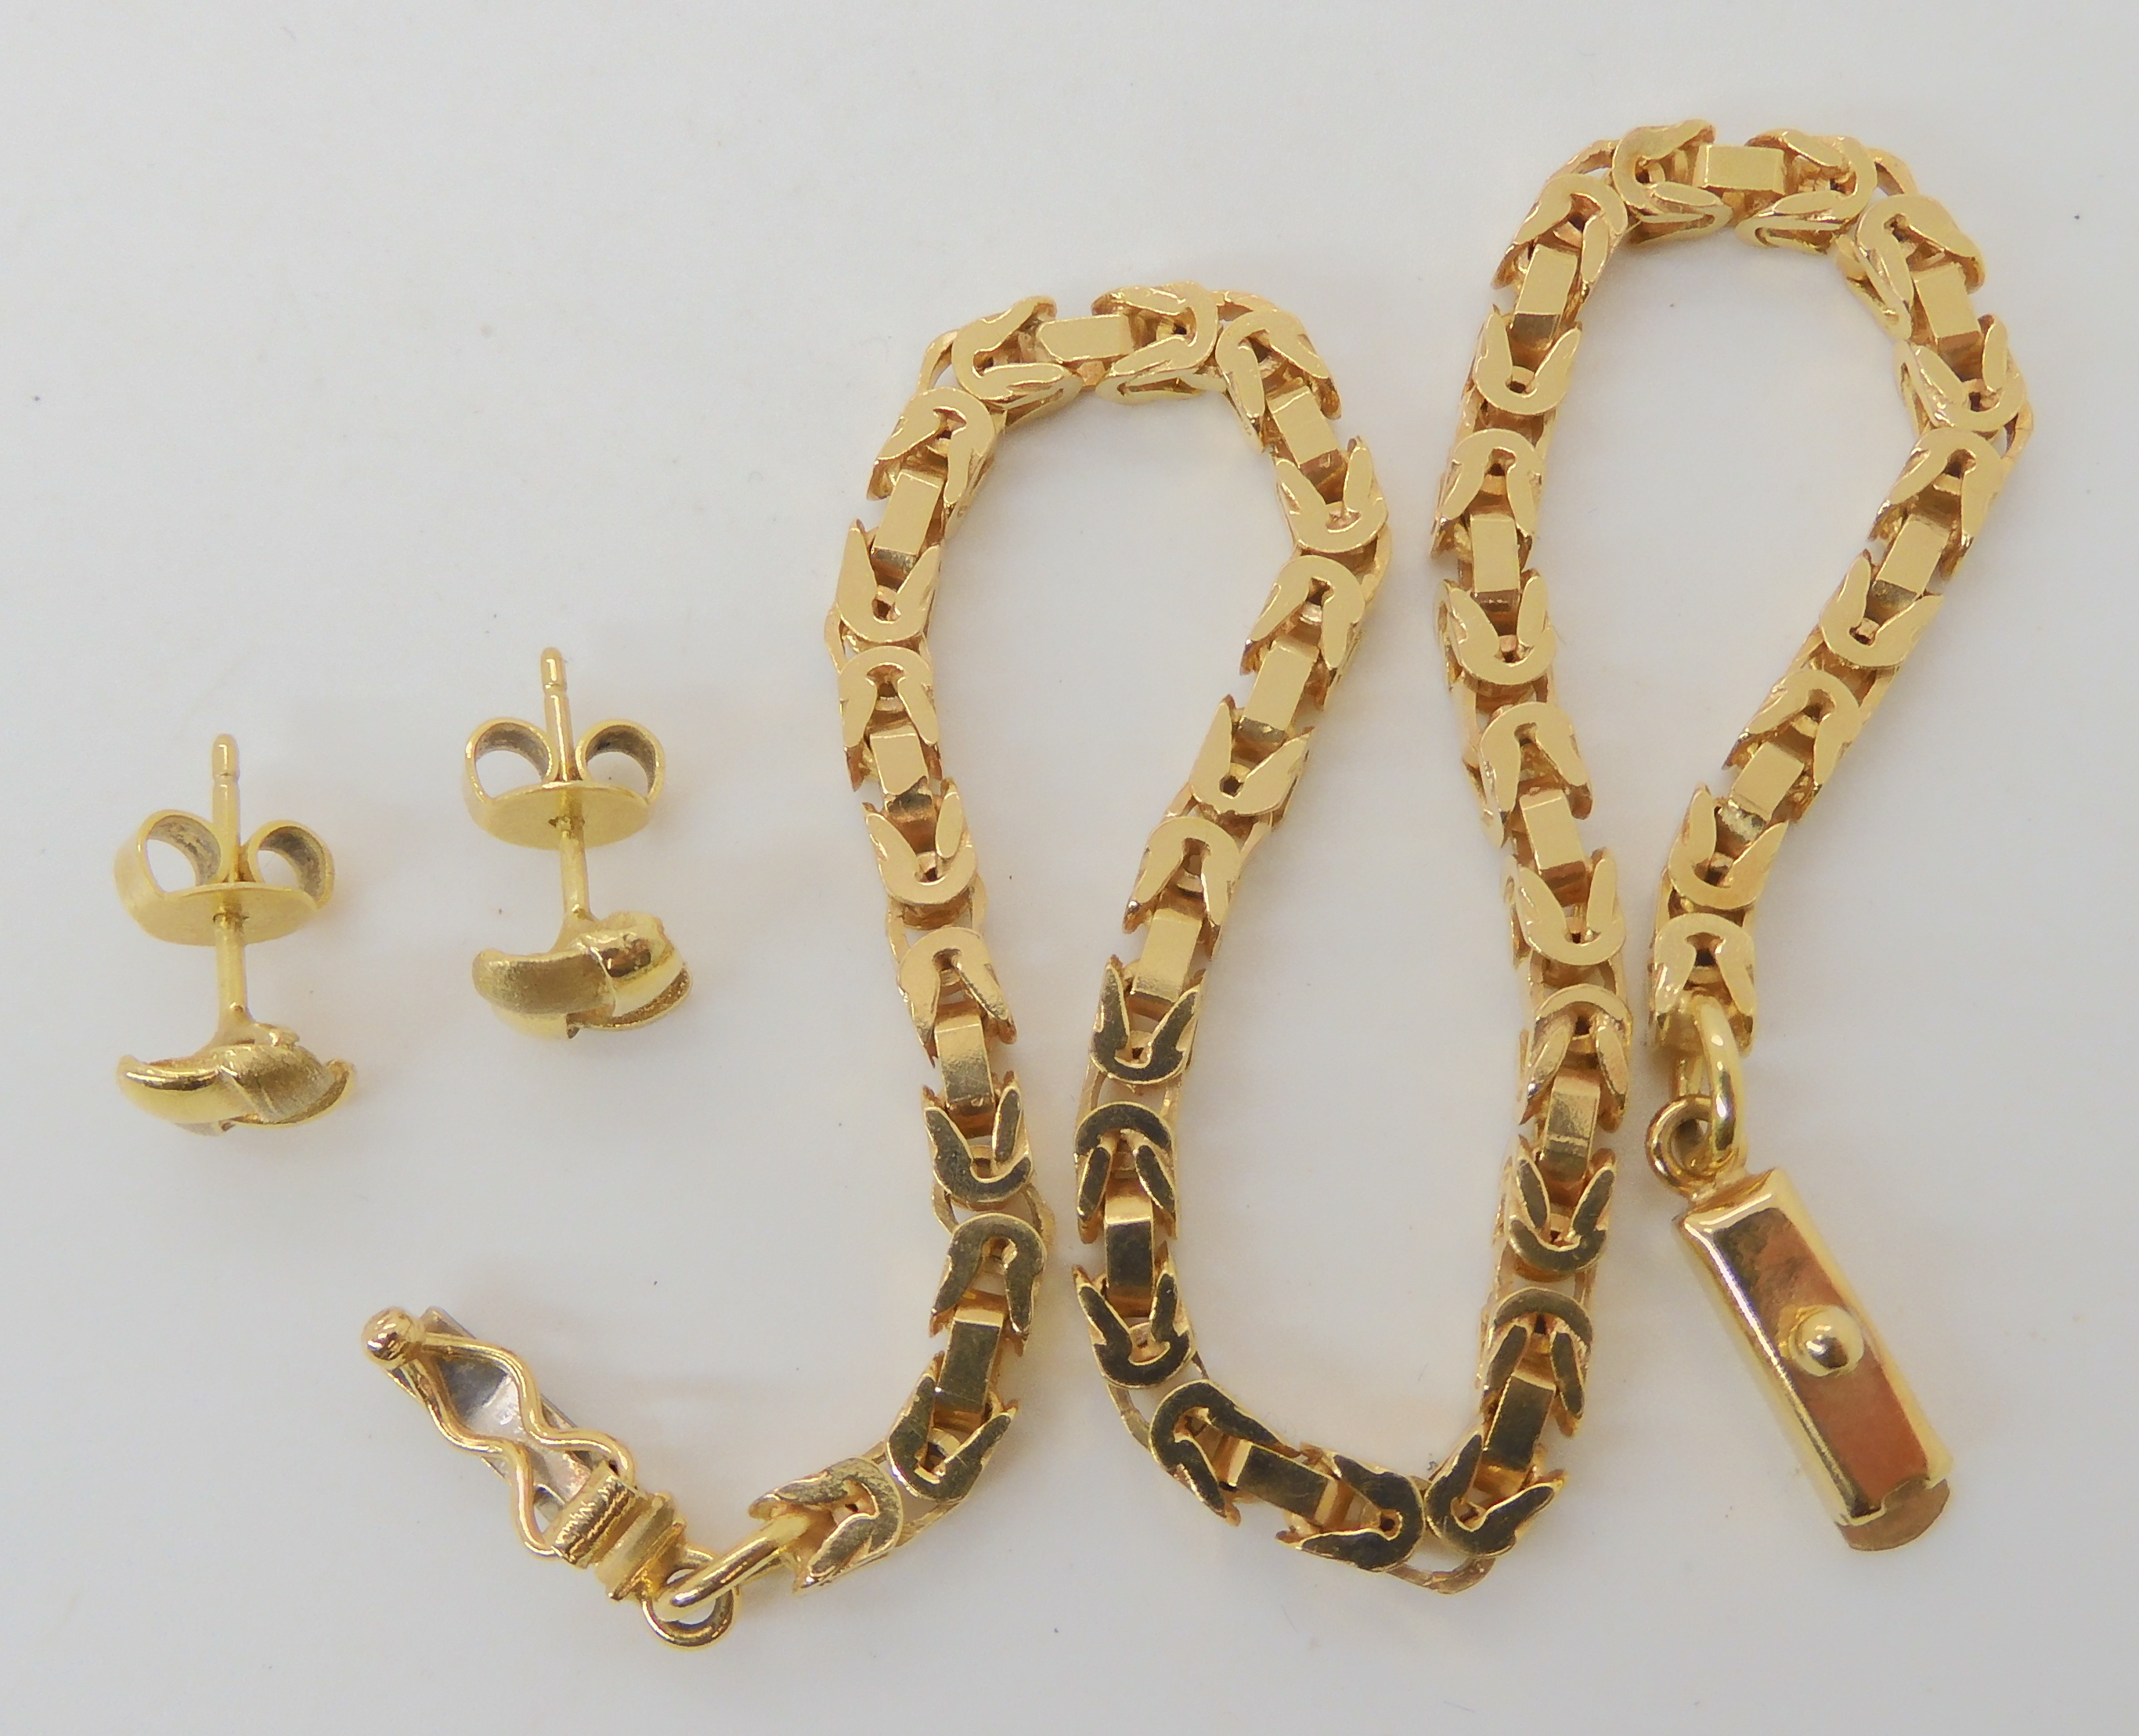 A 9ct gold Italian made chain bracelet, length 20cm, together with a pair of knot shaped earrings,